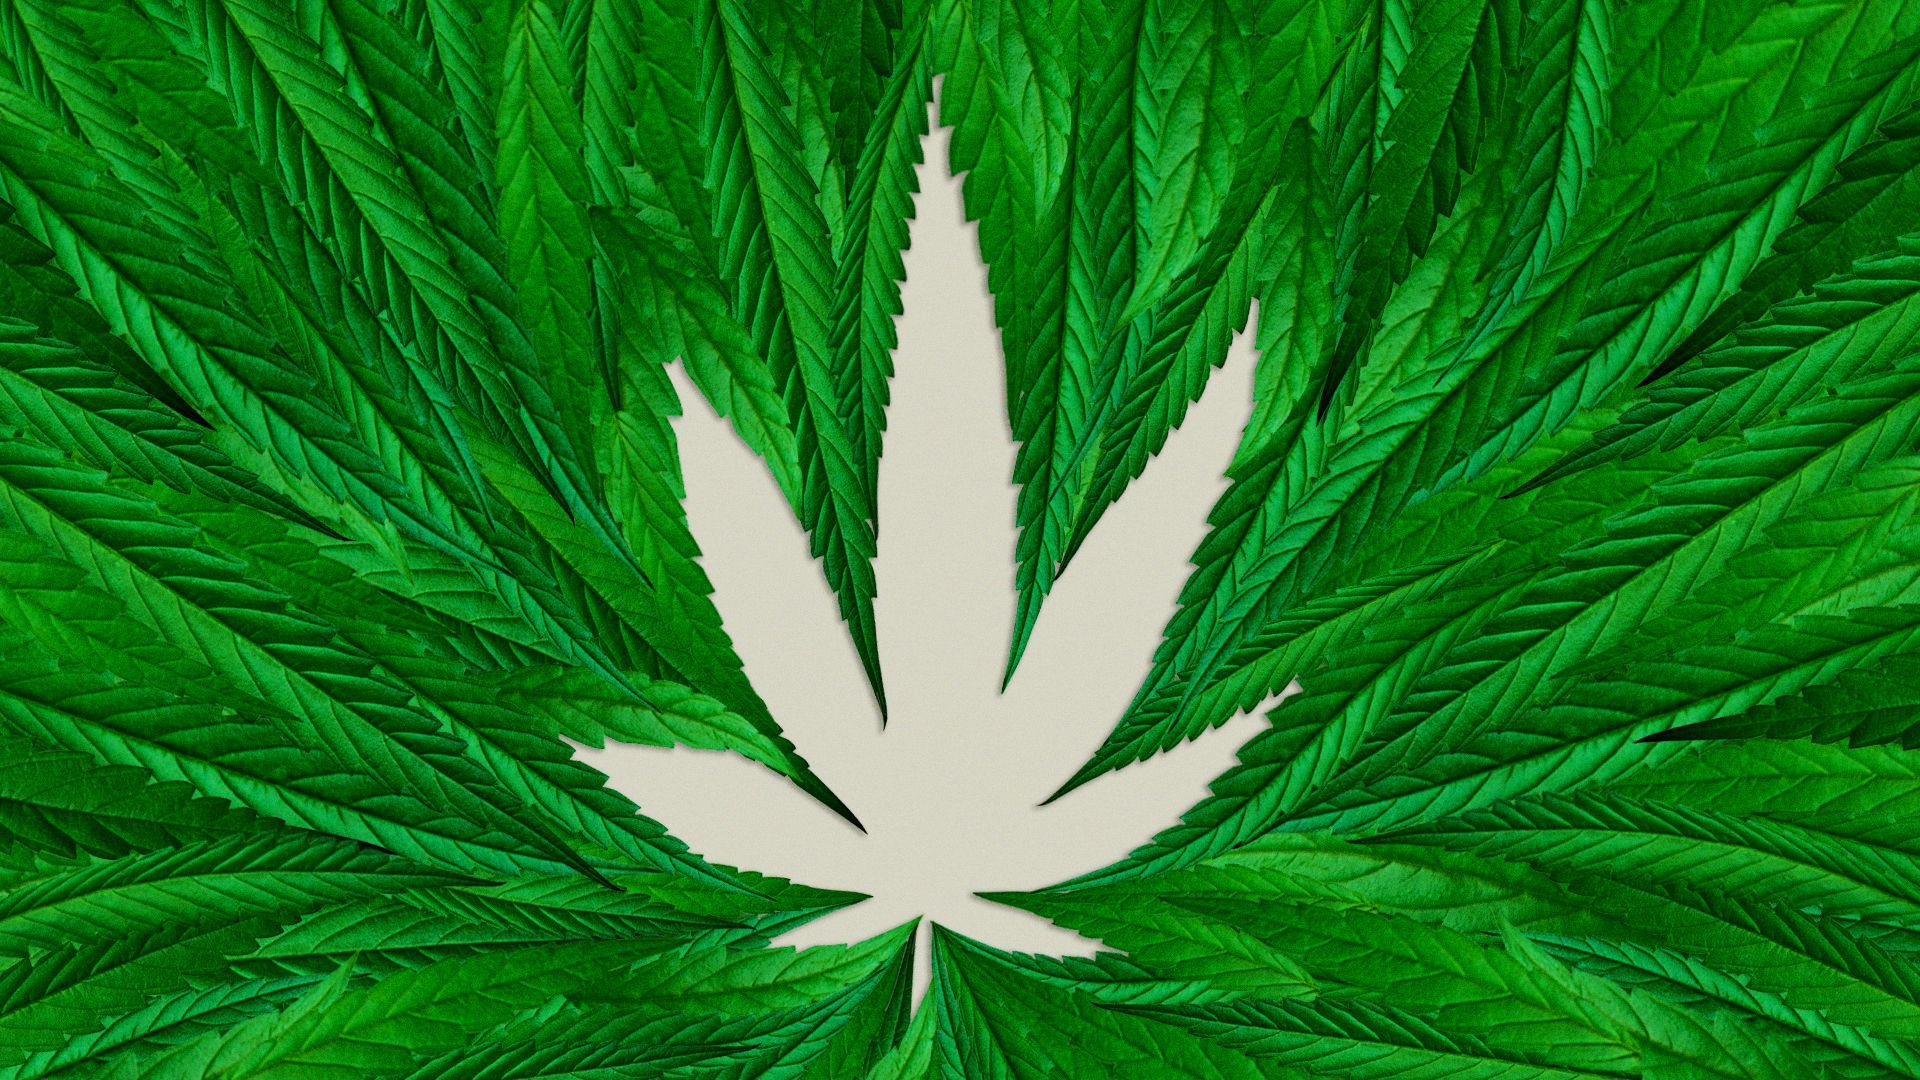 Illustration of a marijuana leaf shown in the negative space of many leaves.